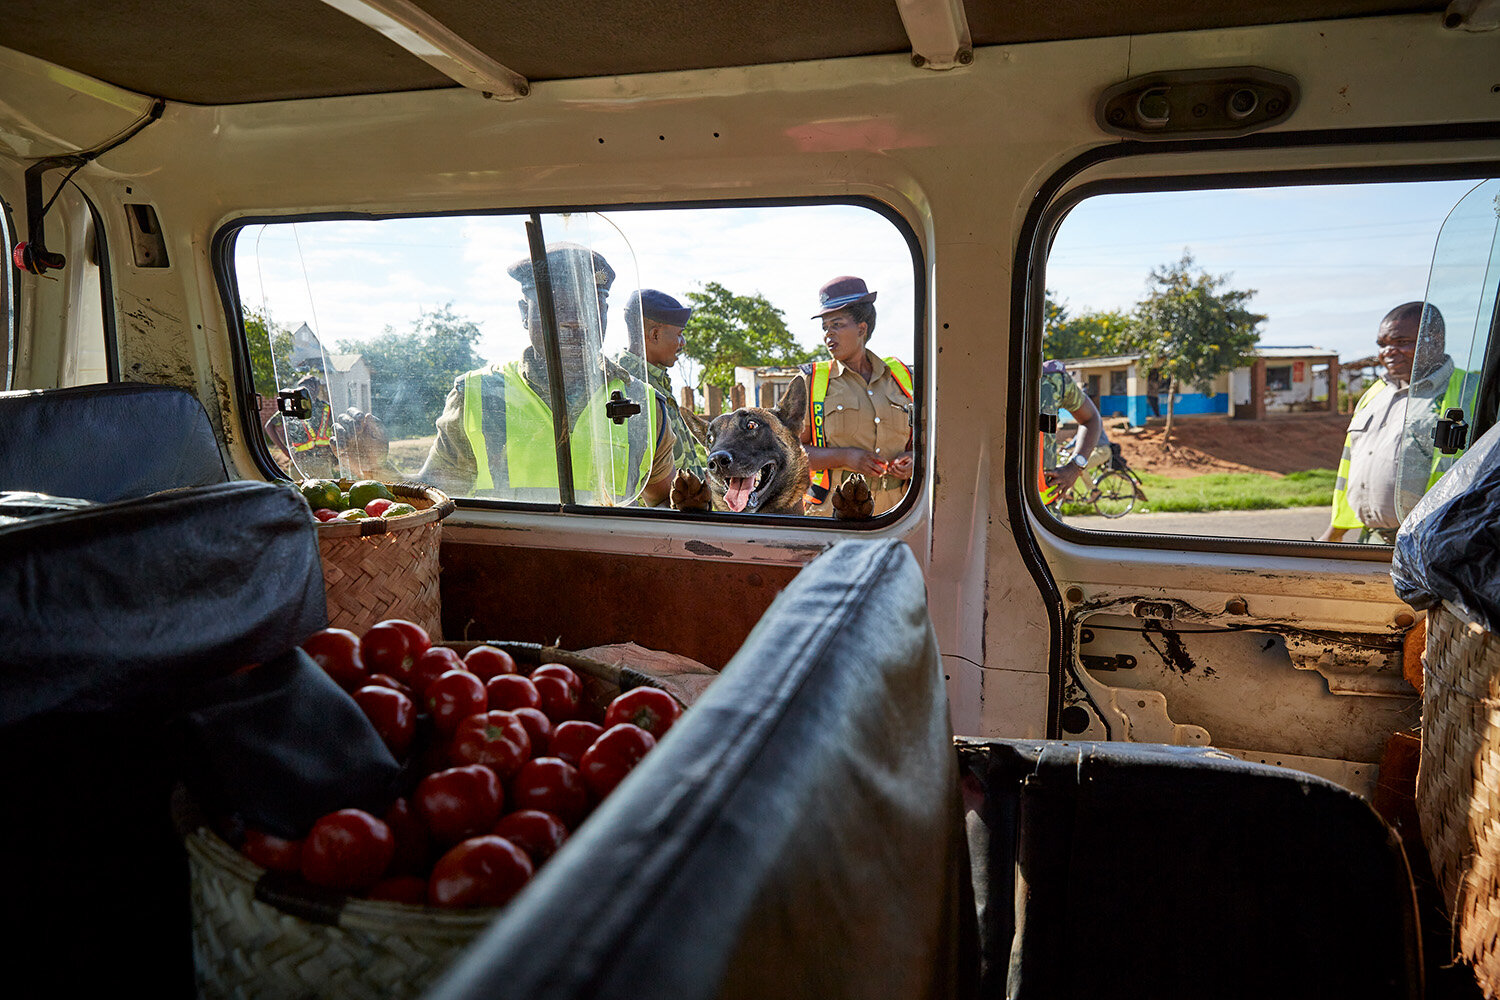  Wildlife Detection Dog Tim searches a minibus at a police road block, Lilongwe, Malawi, 2020. The WDDU uses Malawi Police roadblocks to search vehicles for illegal wildlife products being smuggled in and out of Lilongwe, Malawi’s capital. 